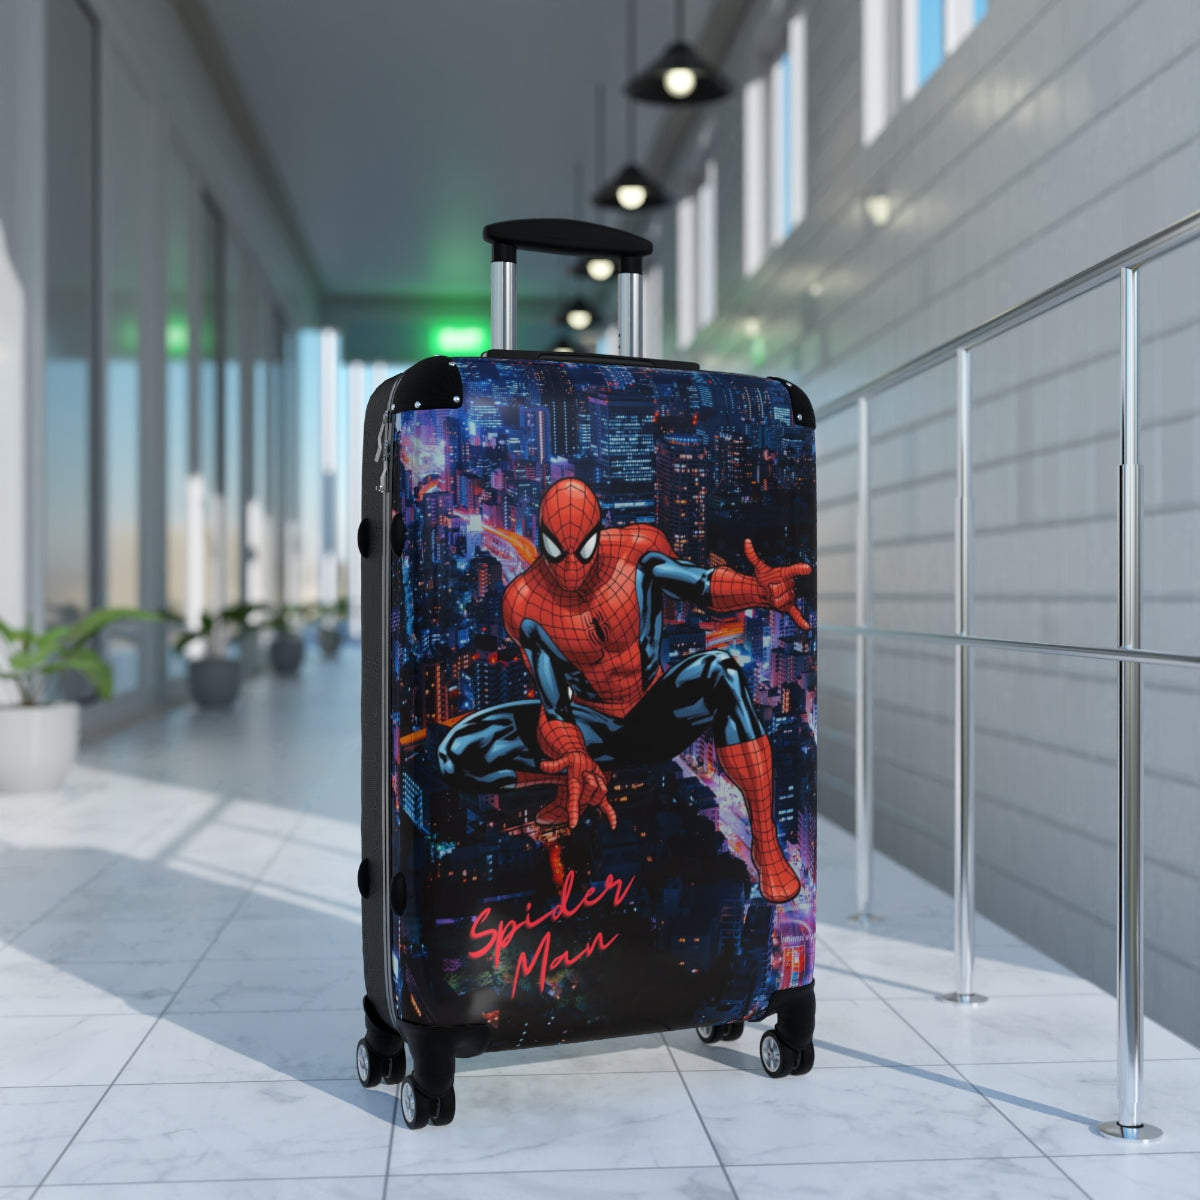 SPIDER MAN CARRY-ON SUITCASE FOR KIDS | LUGGAGE WITH WHEELS |  SPIINNER |  DESIGNER LUGGAGE BY ARTZIRA